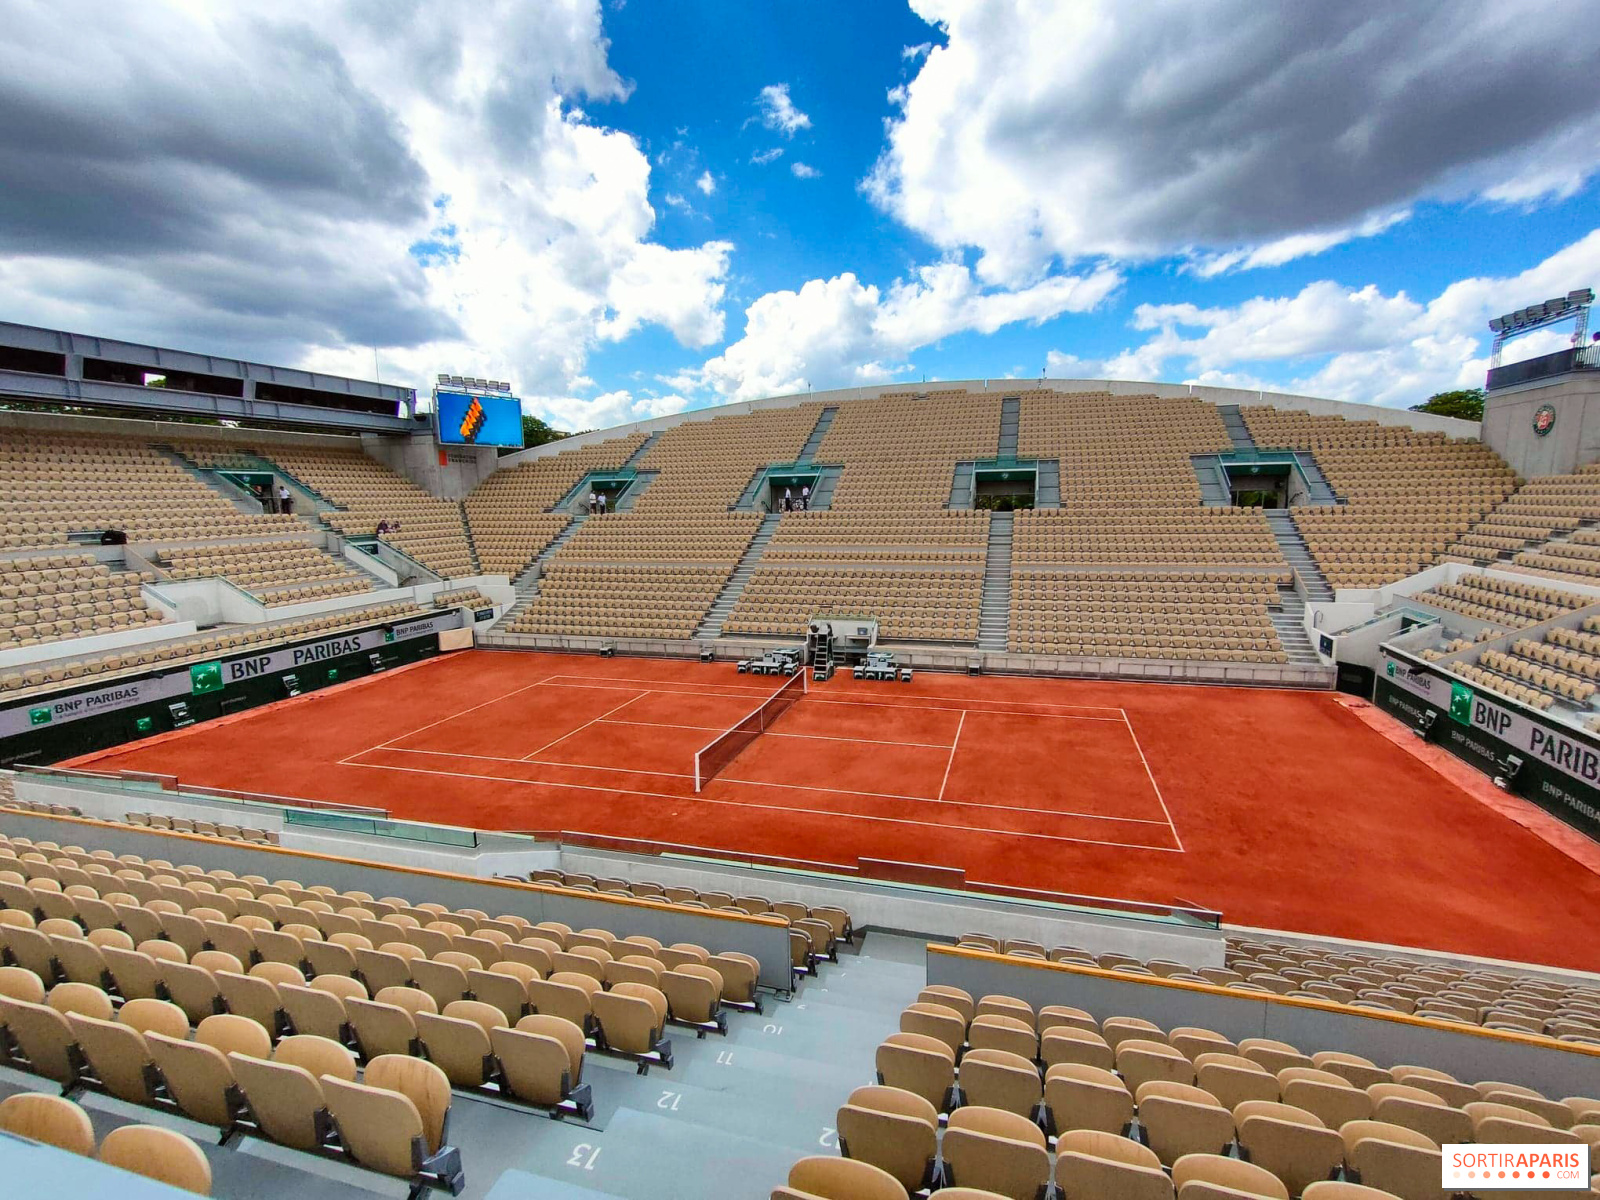 Roland Garros here is the list of players present at the 2023 edition